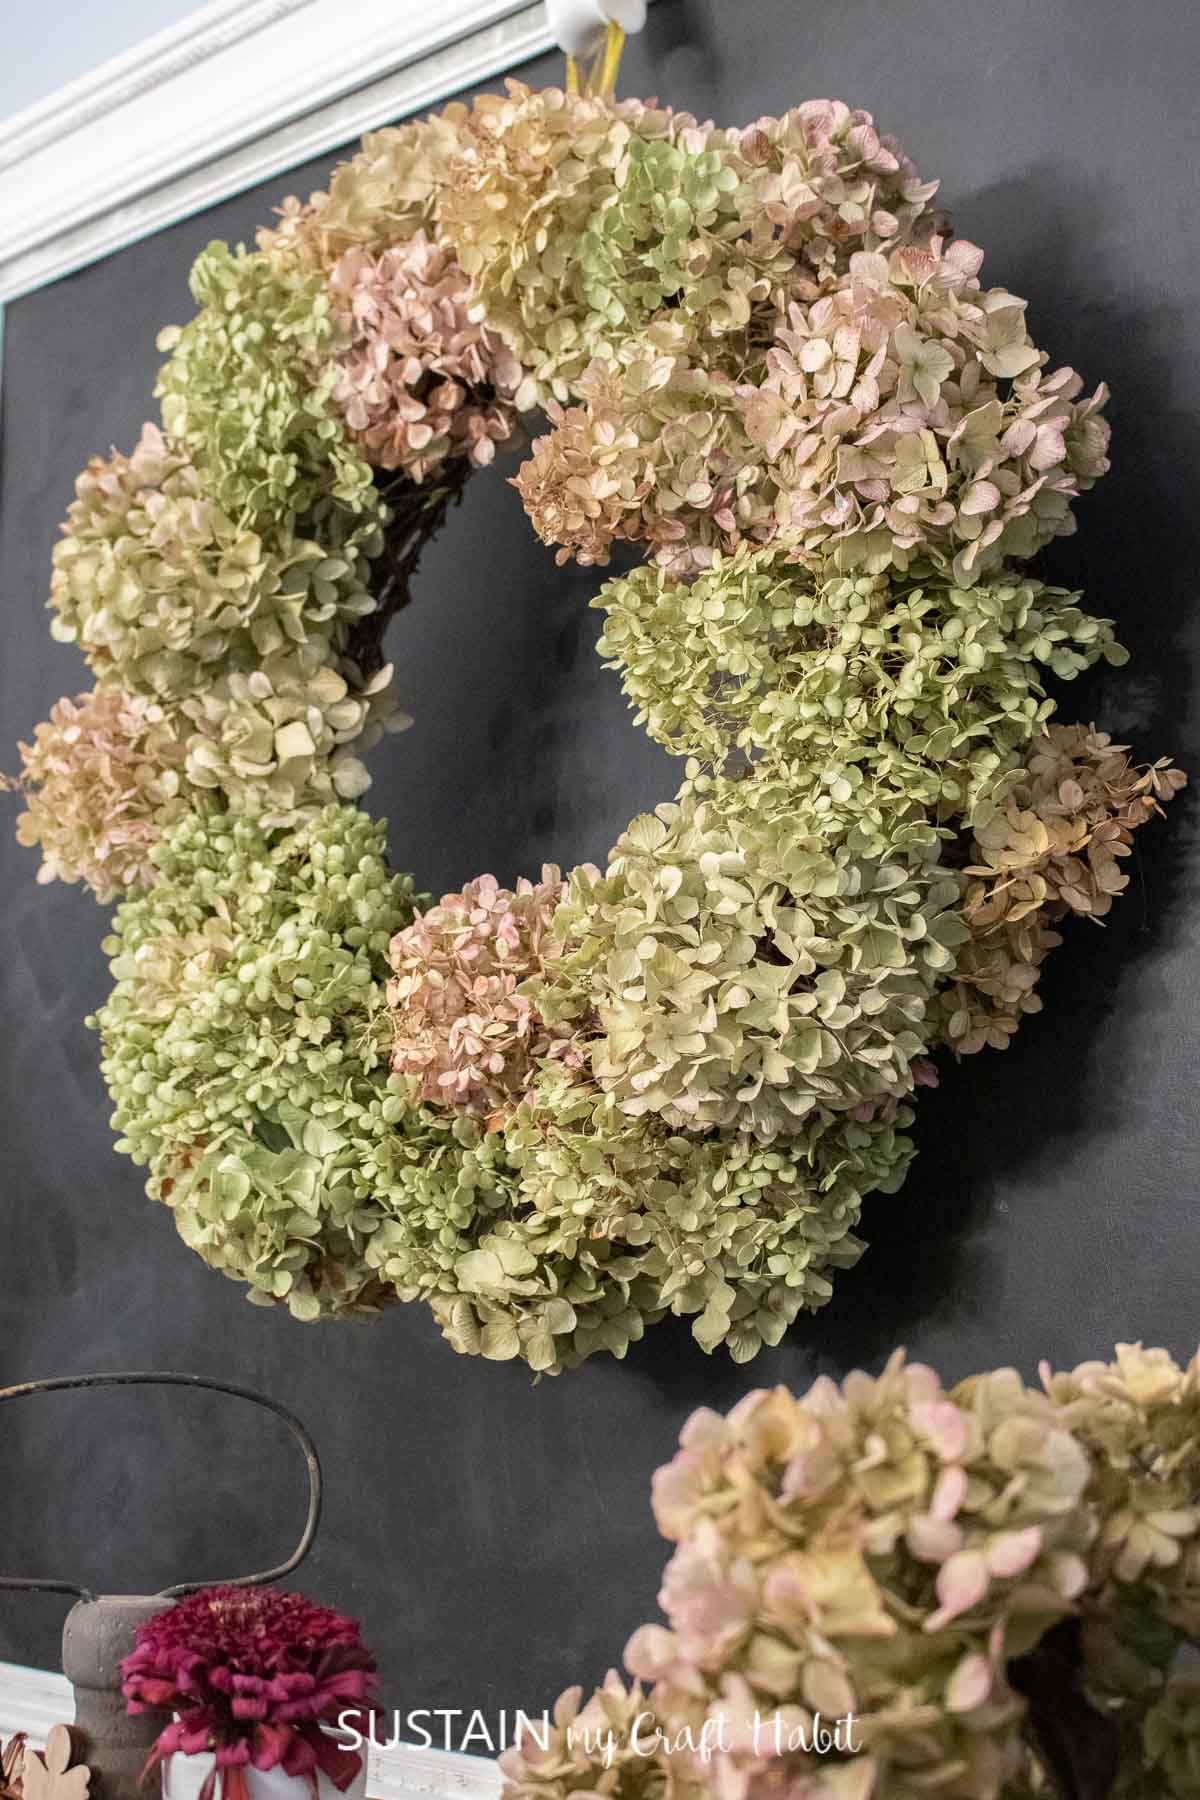 A round wreath made of dried hydrangeas hanging on a glack wall.